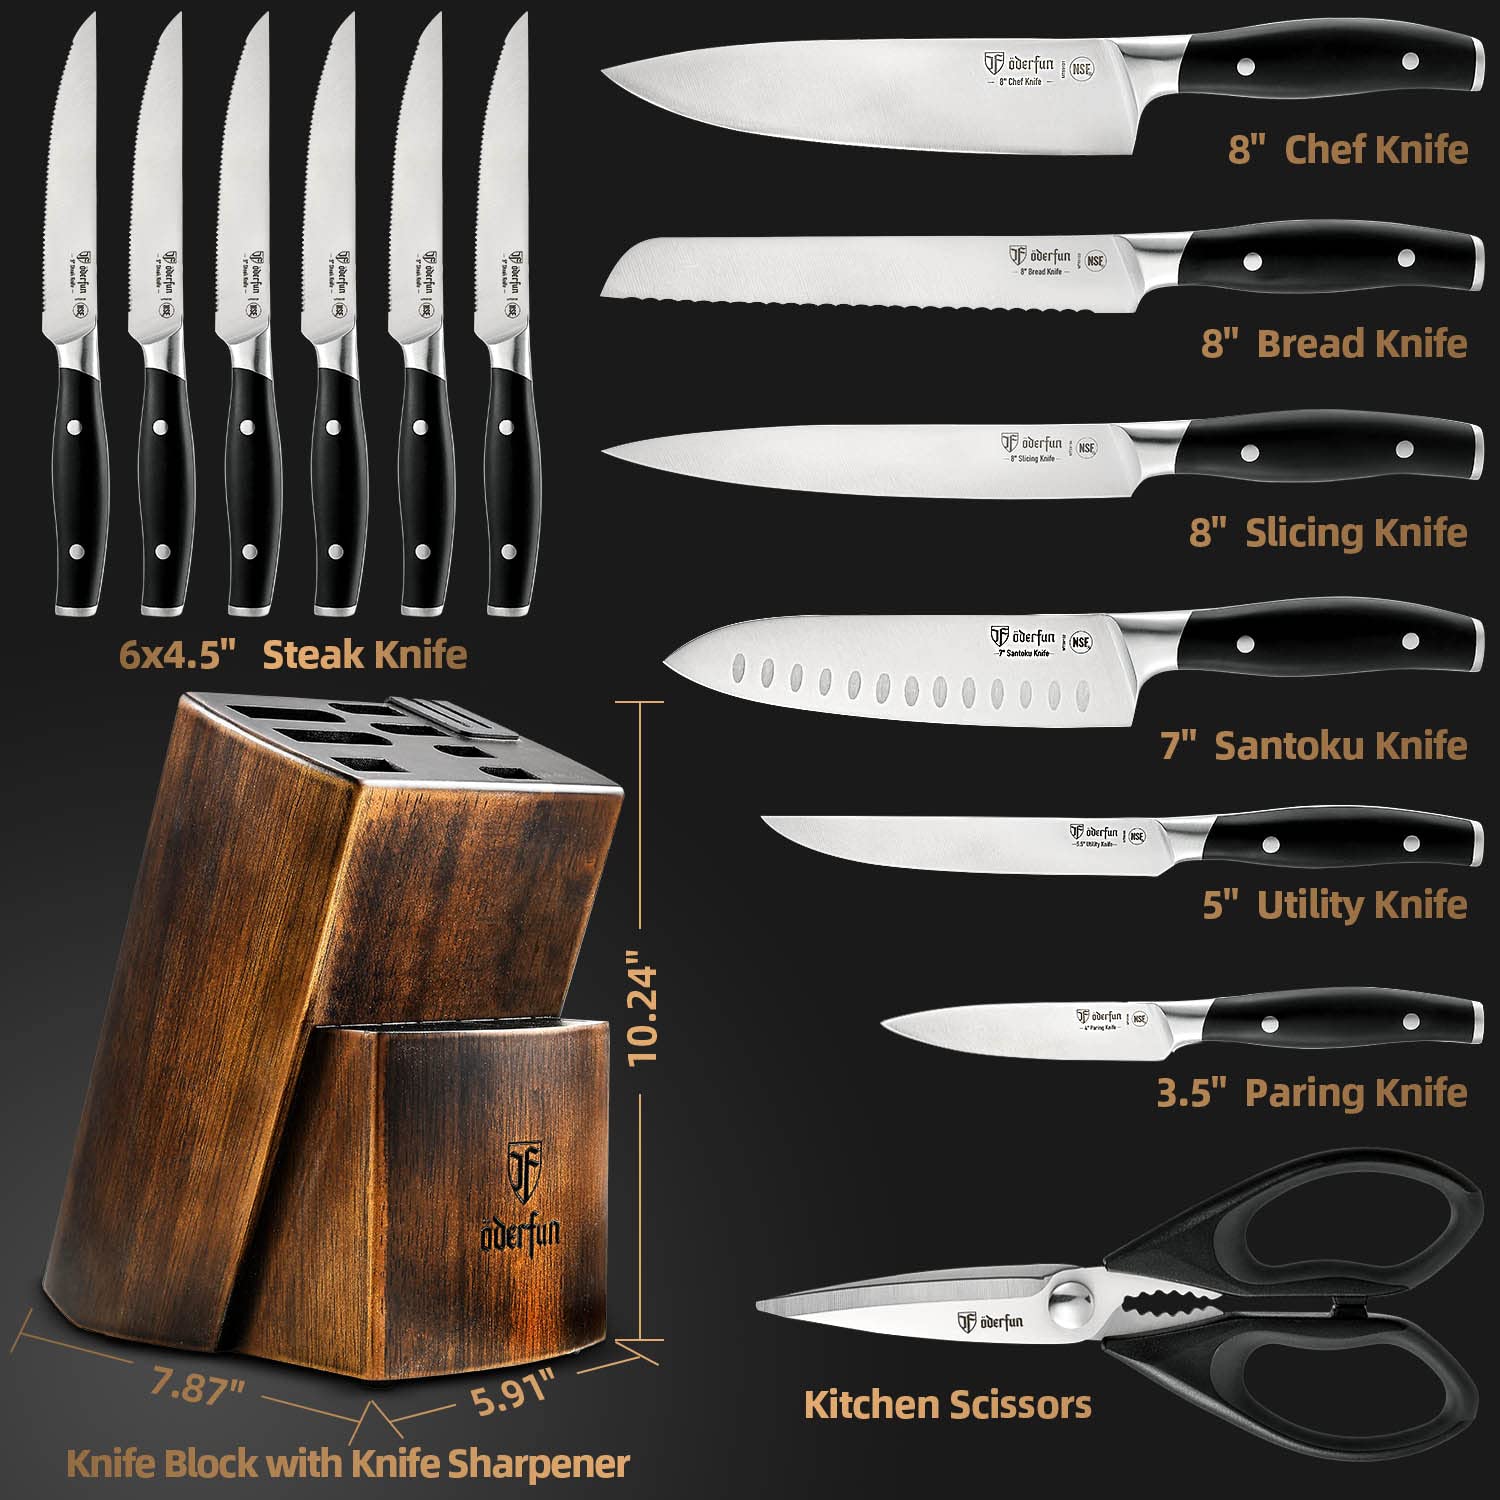 Knife Set with Block, ODERFUN 15 Pcs 1.4116 German Steel Kitchen Knife Set, Ultra Sharp Knives Set for Kitchen with Knife Sharpener, Ergonomic Handle Full Tang Forged with NSF Certified